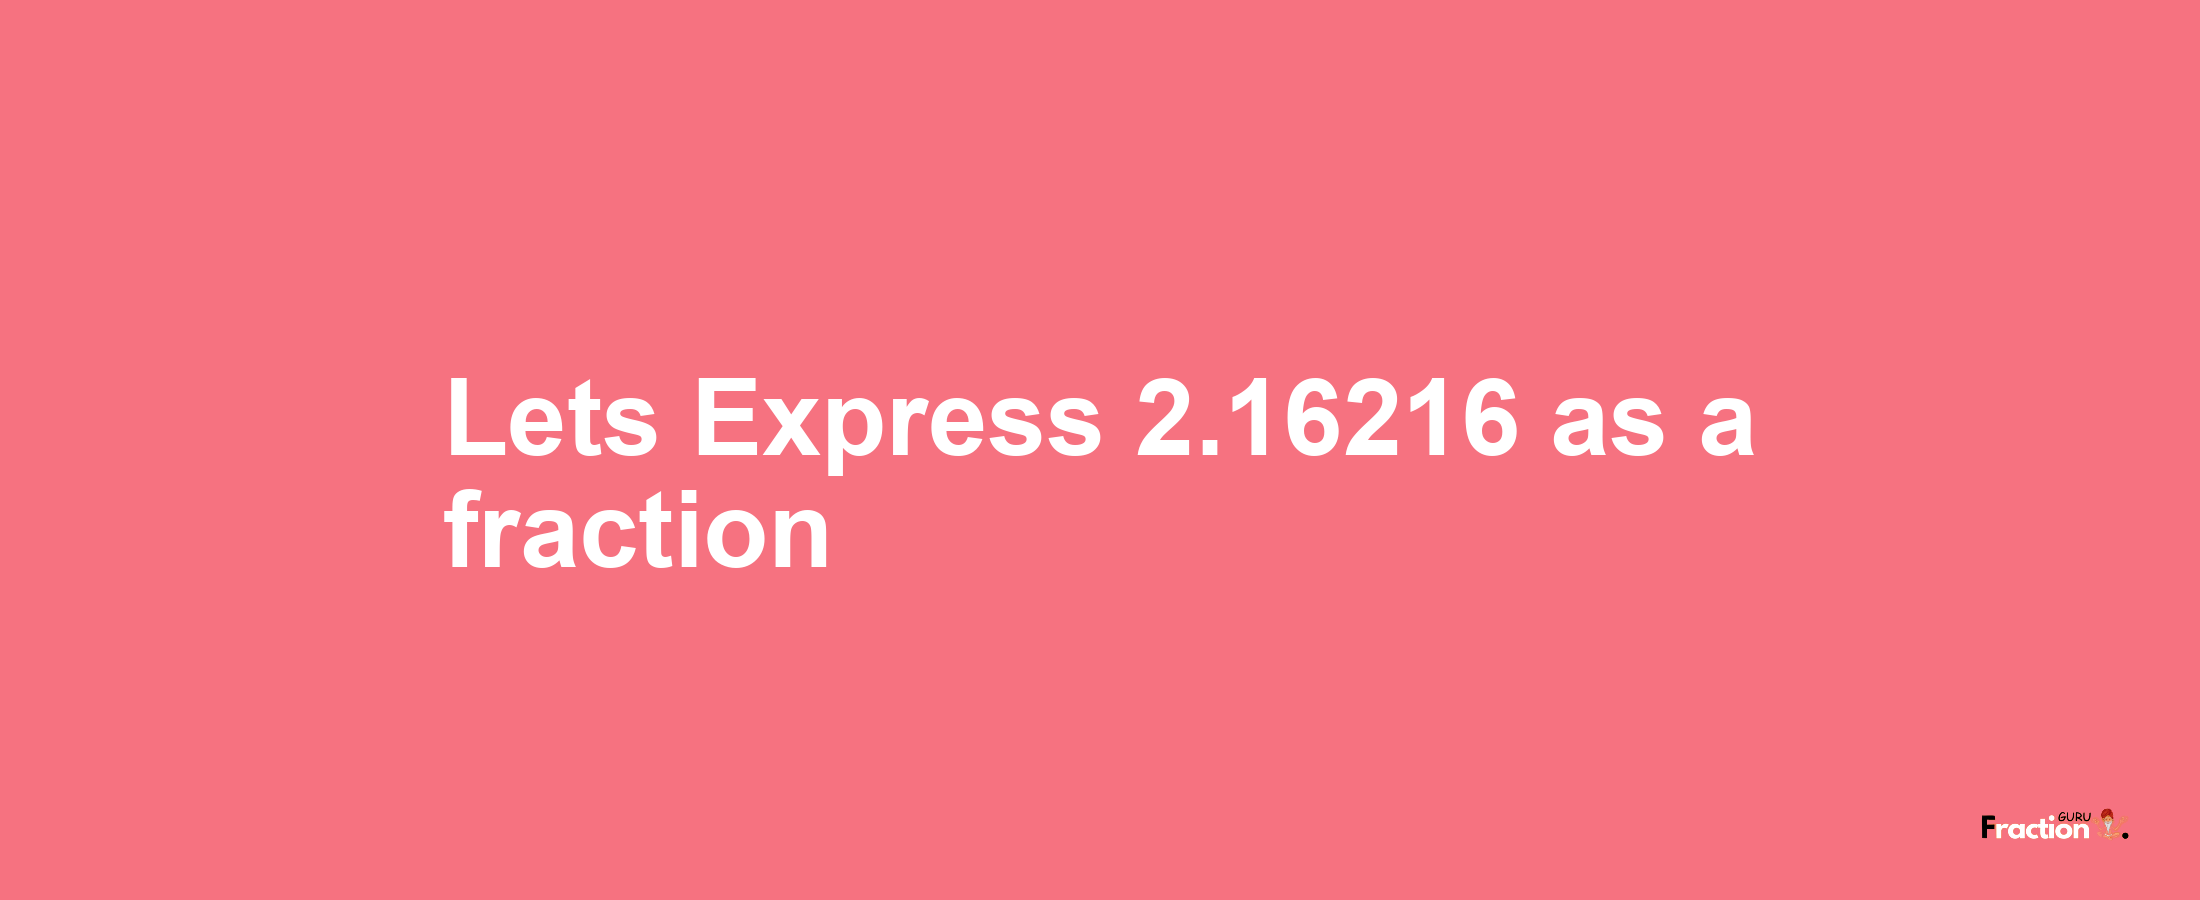 Lets Express 2.16216 as afraction